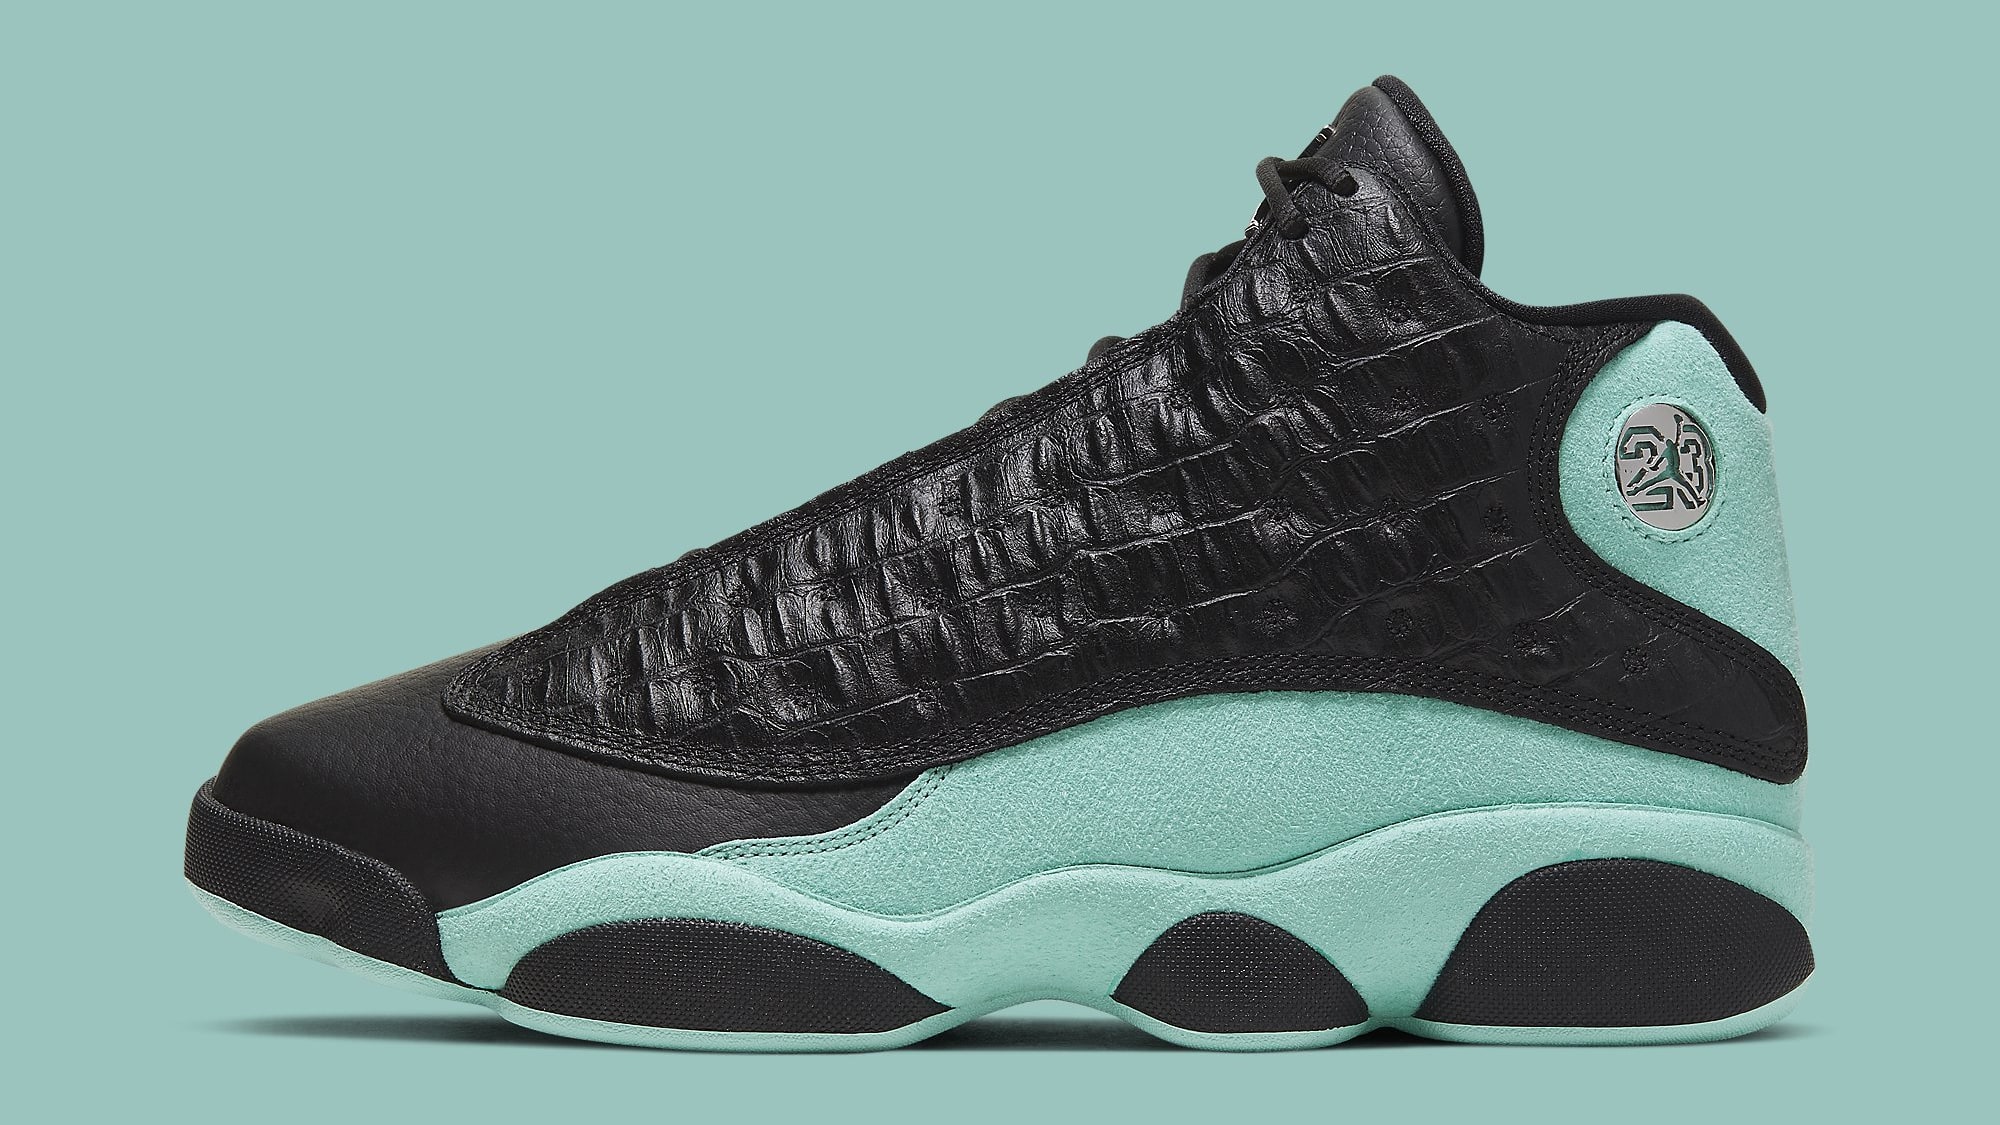 jordans black and turquoise